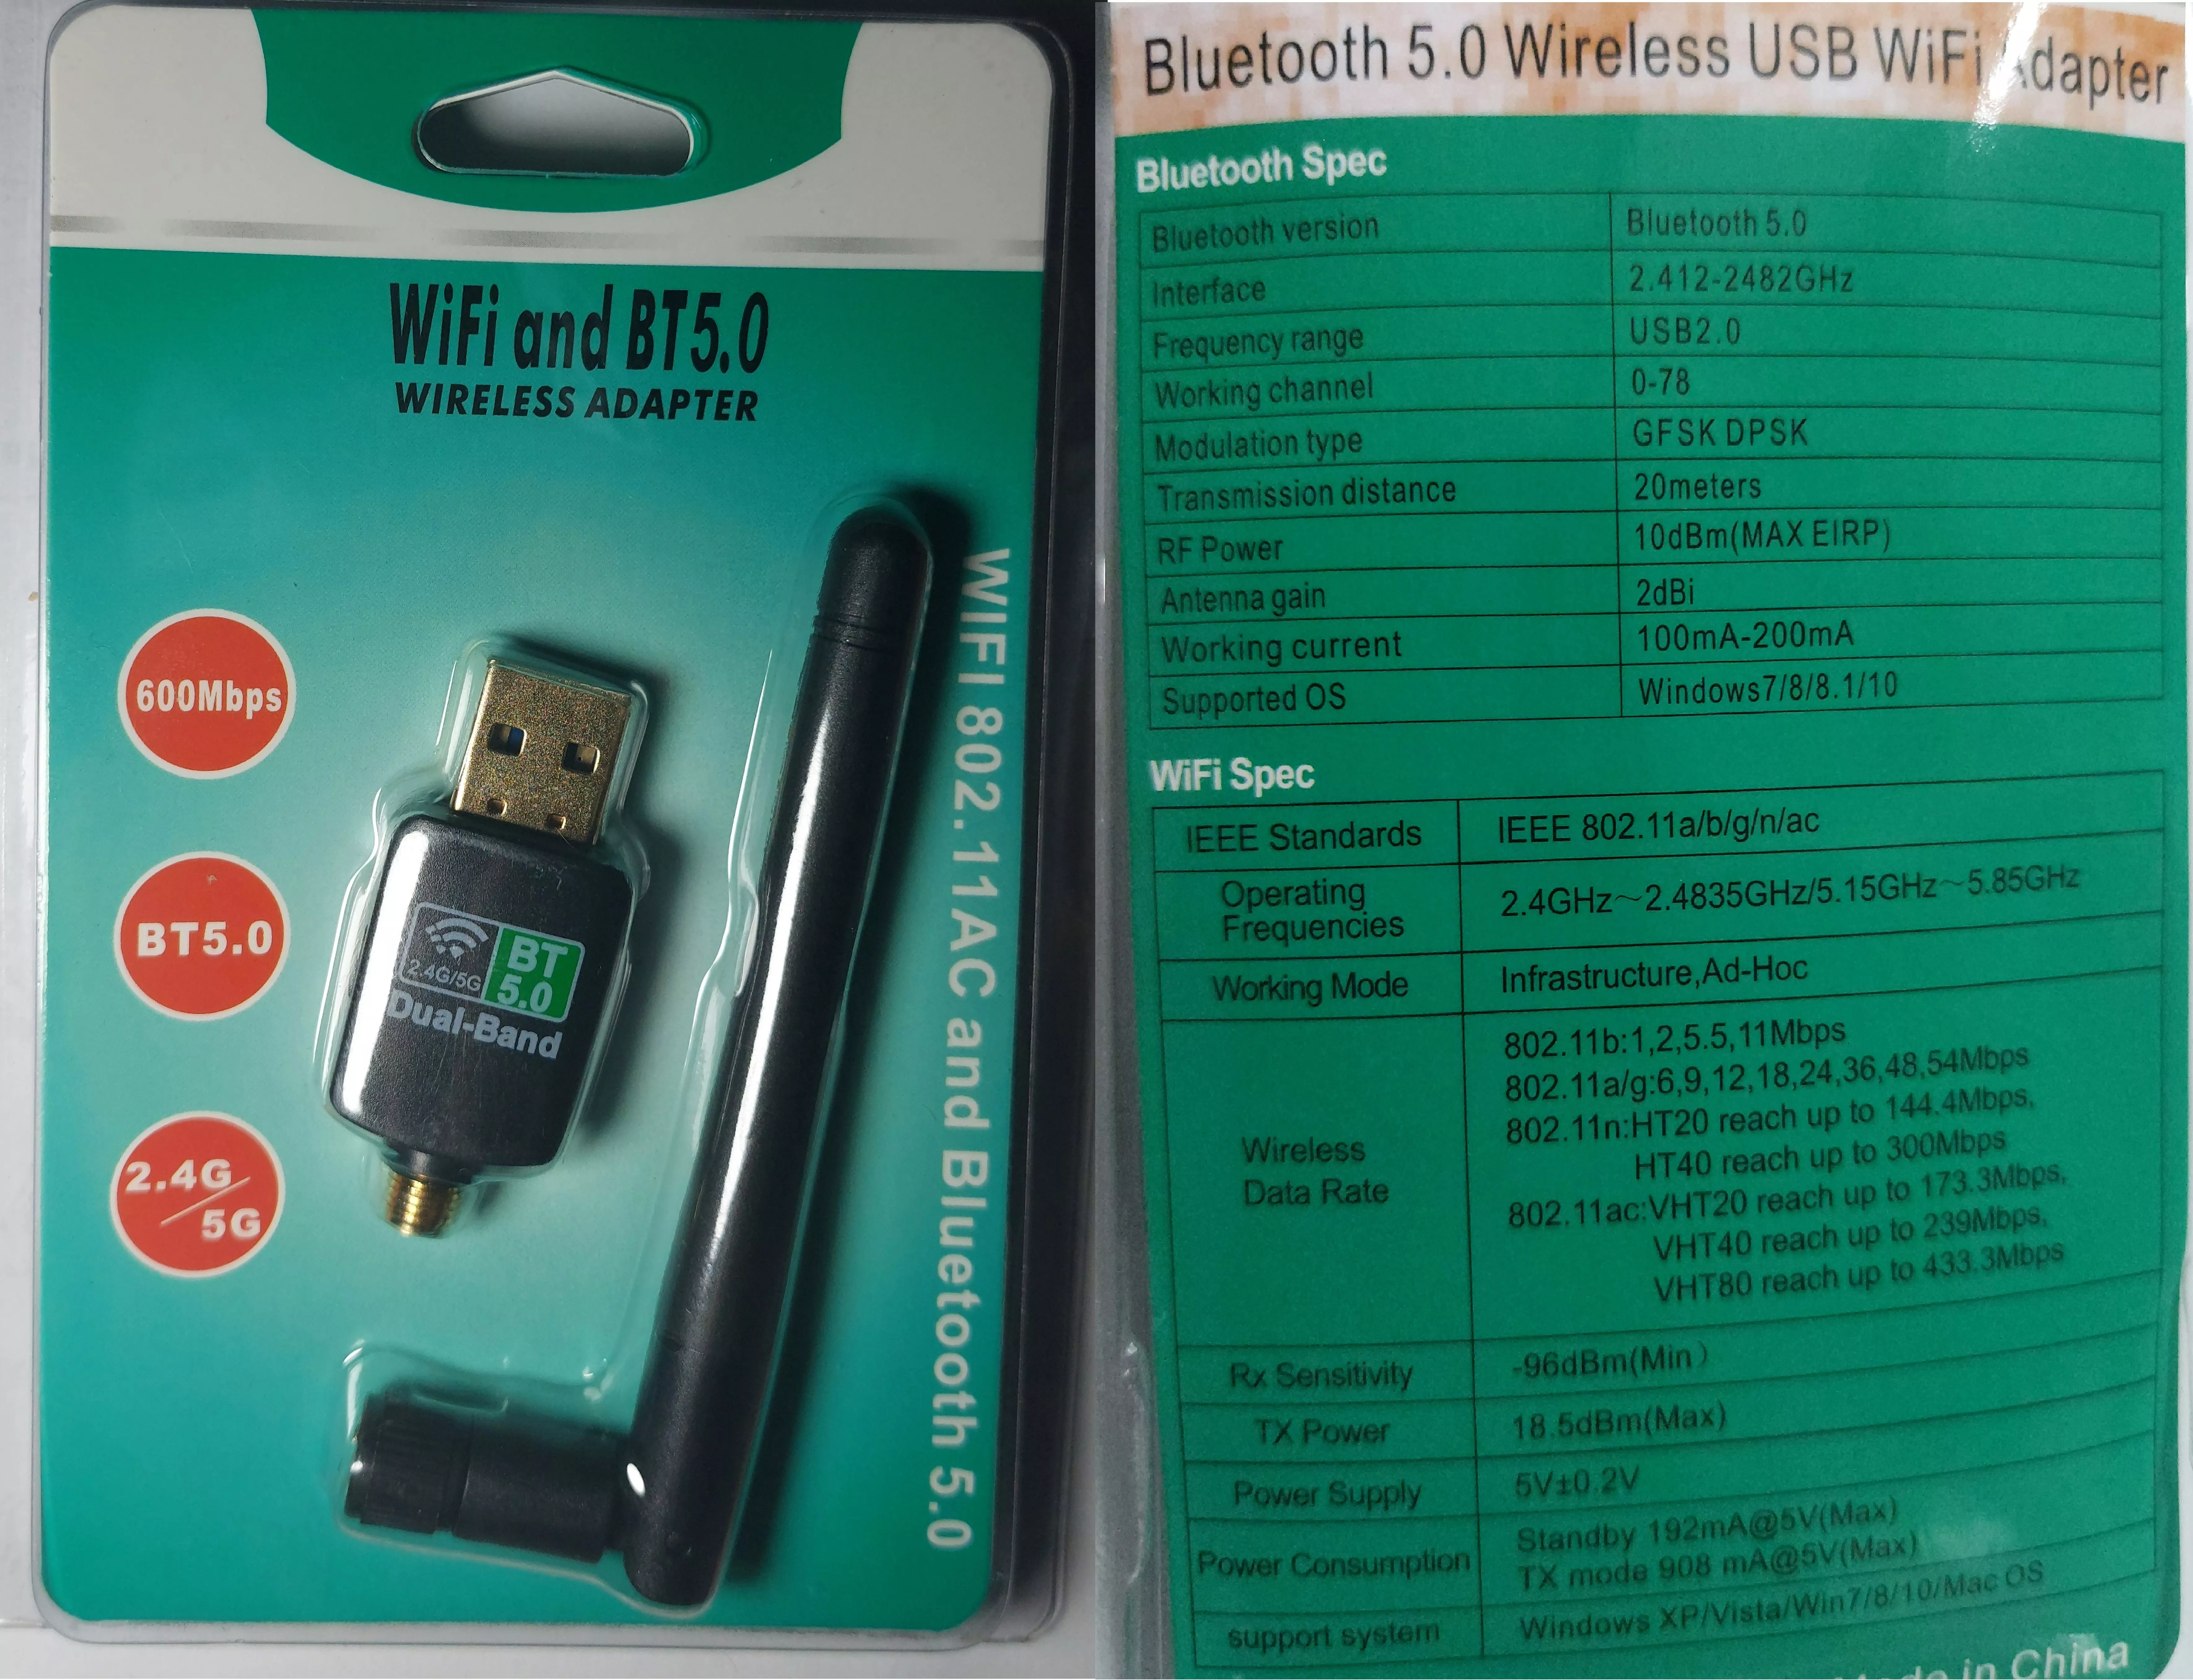 https://www.xgamertechnologies.com/images/products/600Mbps WiFi Bluetooth v5 Wireless USB Dual Band Dongle.webp